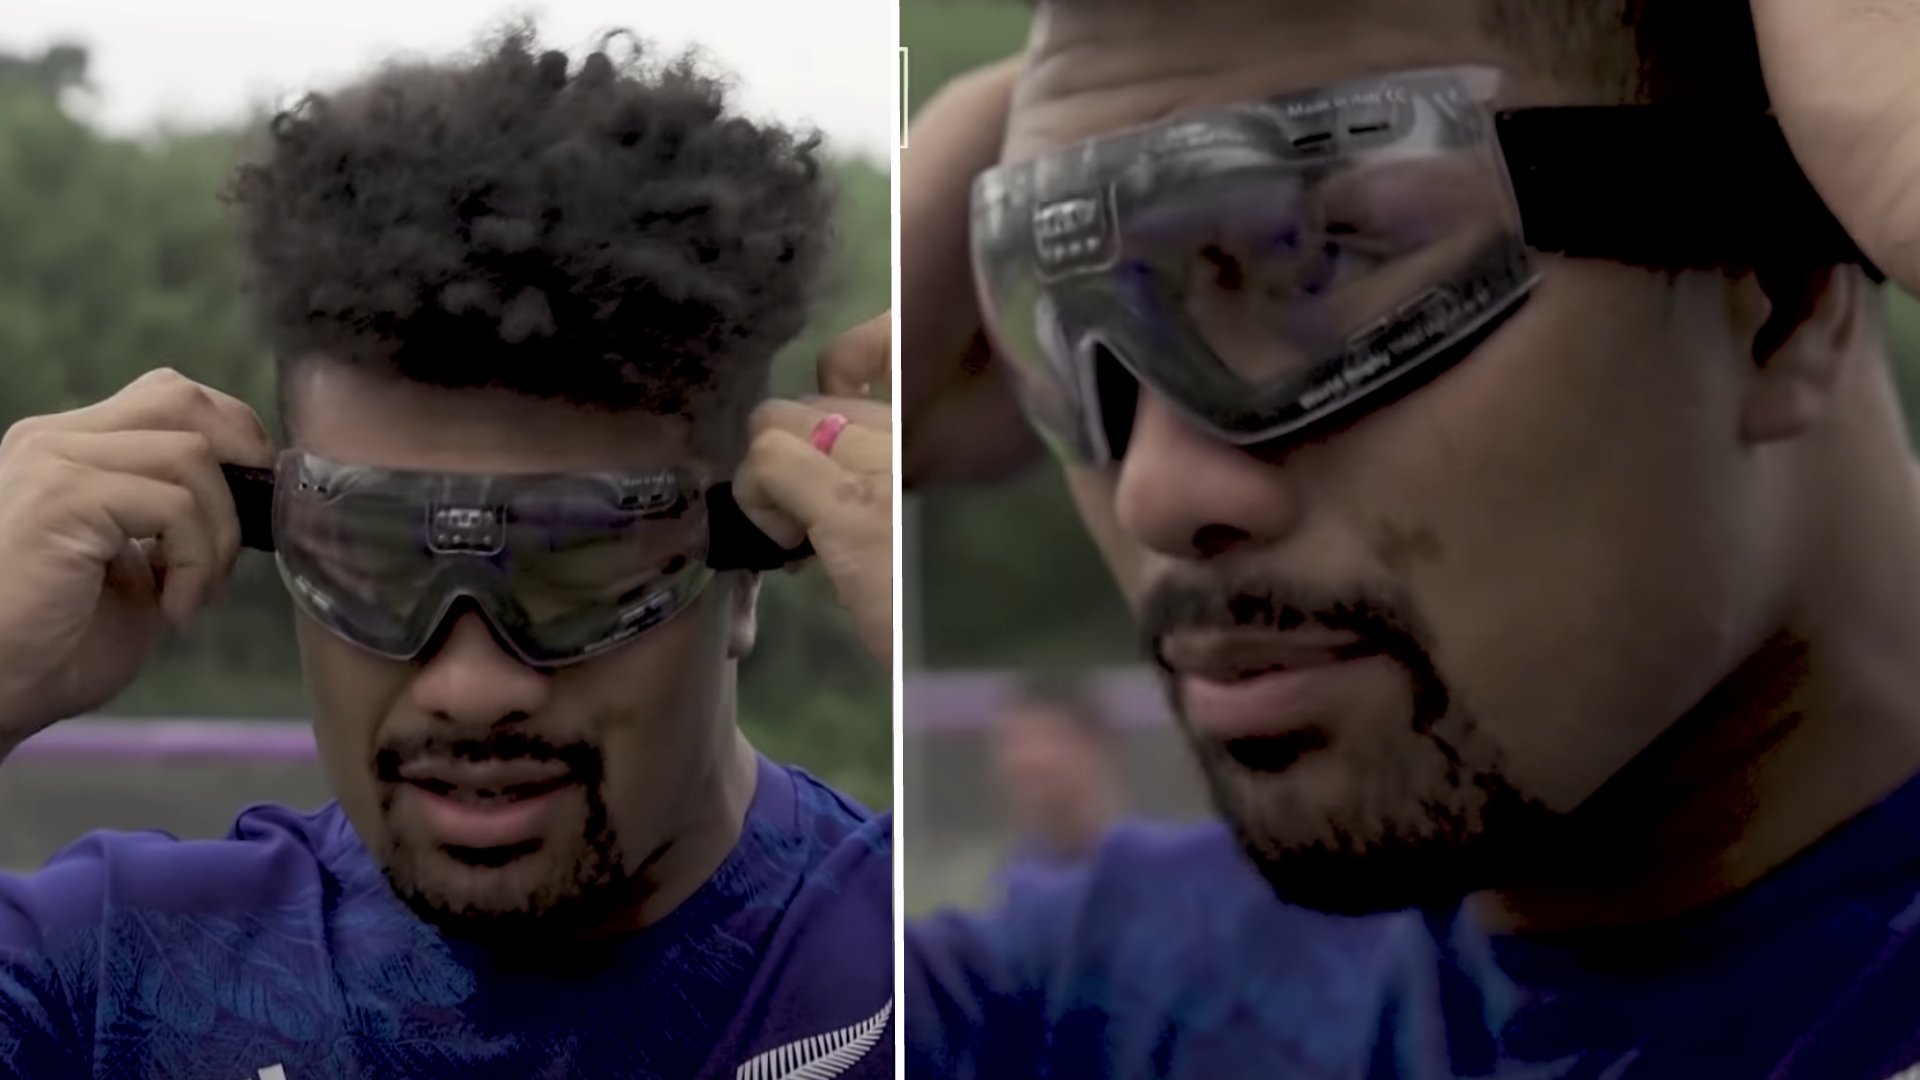 All Blacks introducing controversial goggles in yet another display of blatant cheating